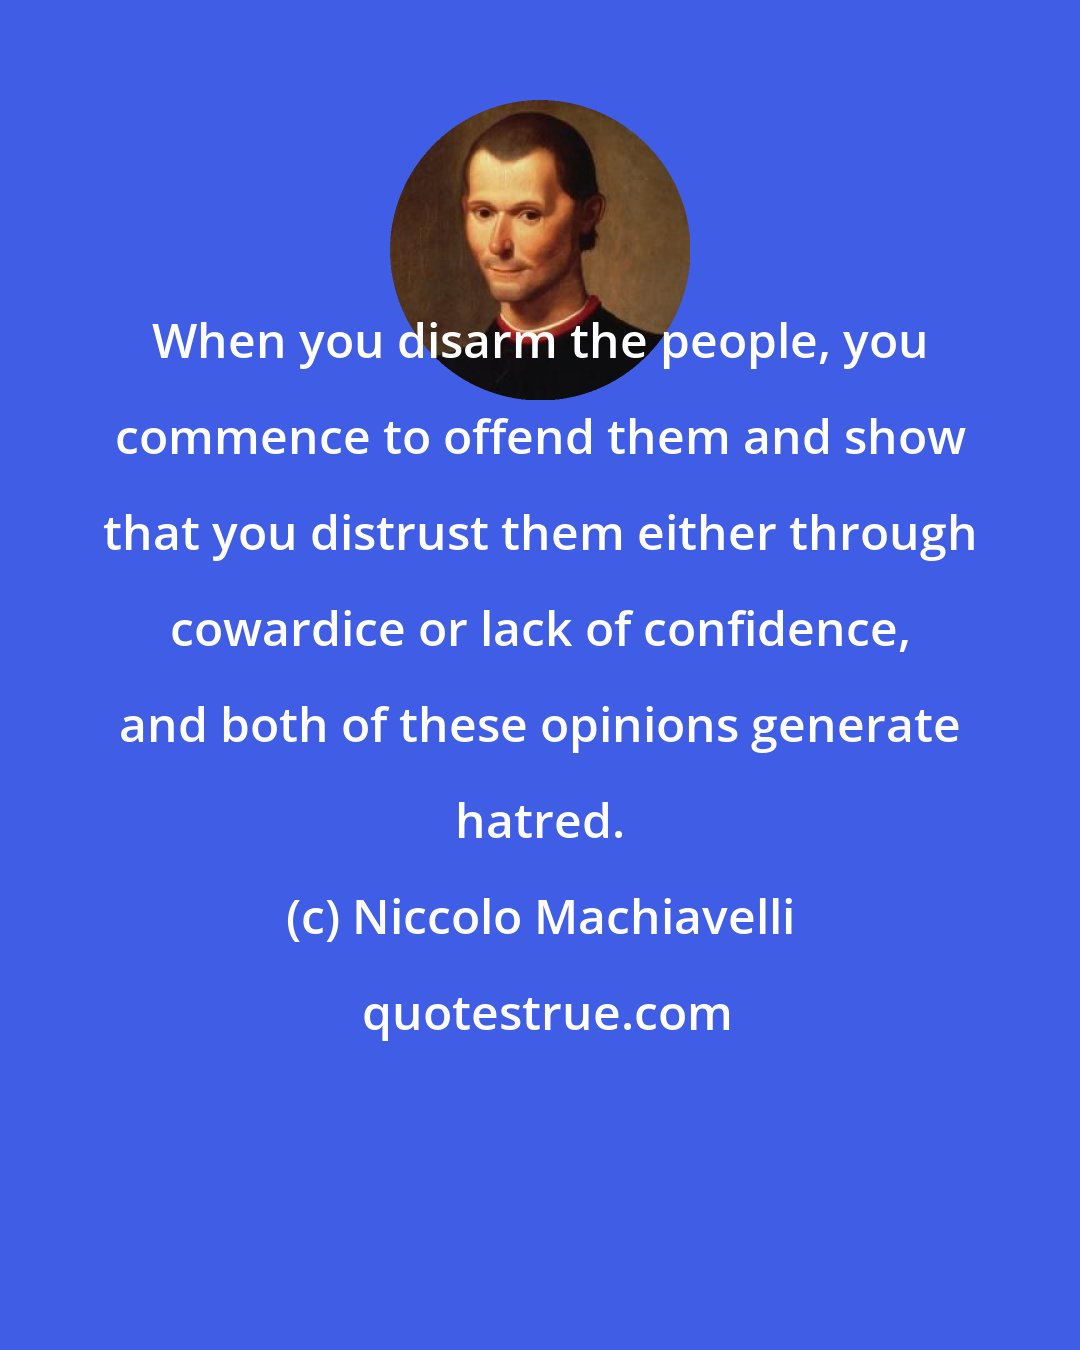 Niccolo Machiavelli: When you disarm the people, you commence to offend them and show that you distrust them either through cowardice or lack of confidence, and both of these opinions generate hatred.